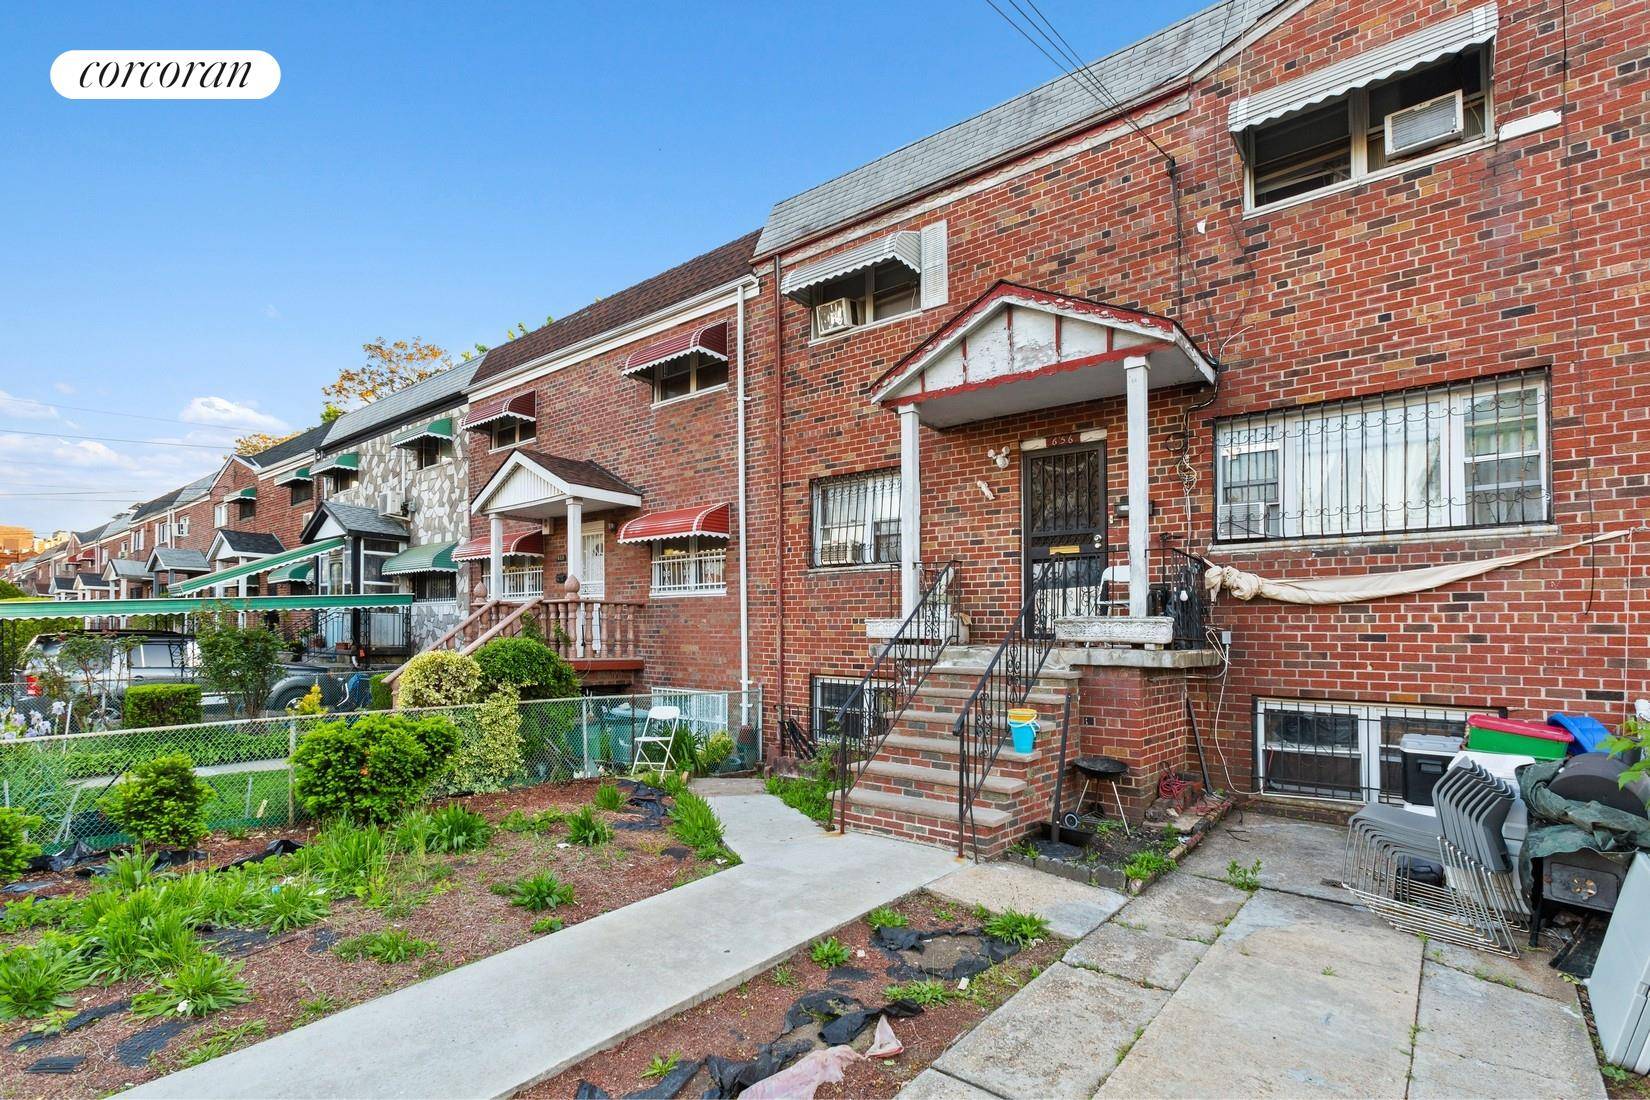 If you've been looking for a home in East New York, Brooklyn, 656 Van Siclen Avenue is what Brooklyn real estate dreams are made of !